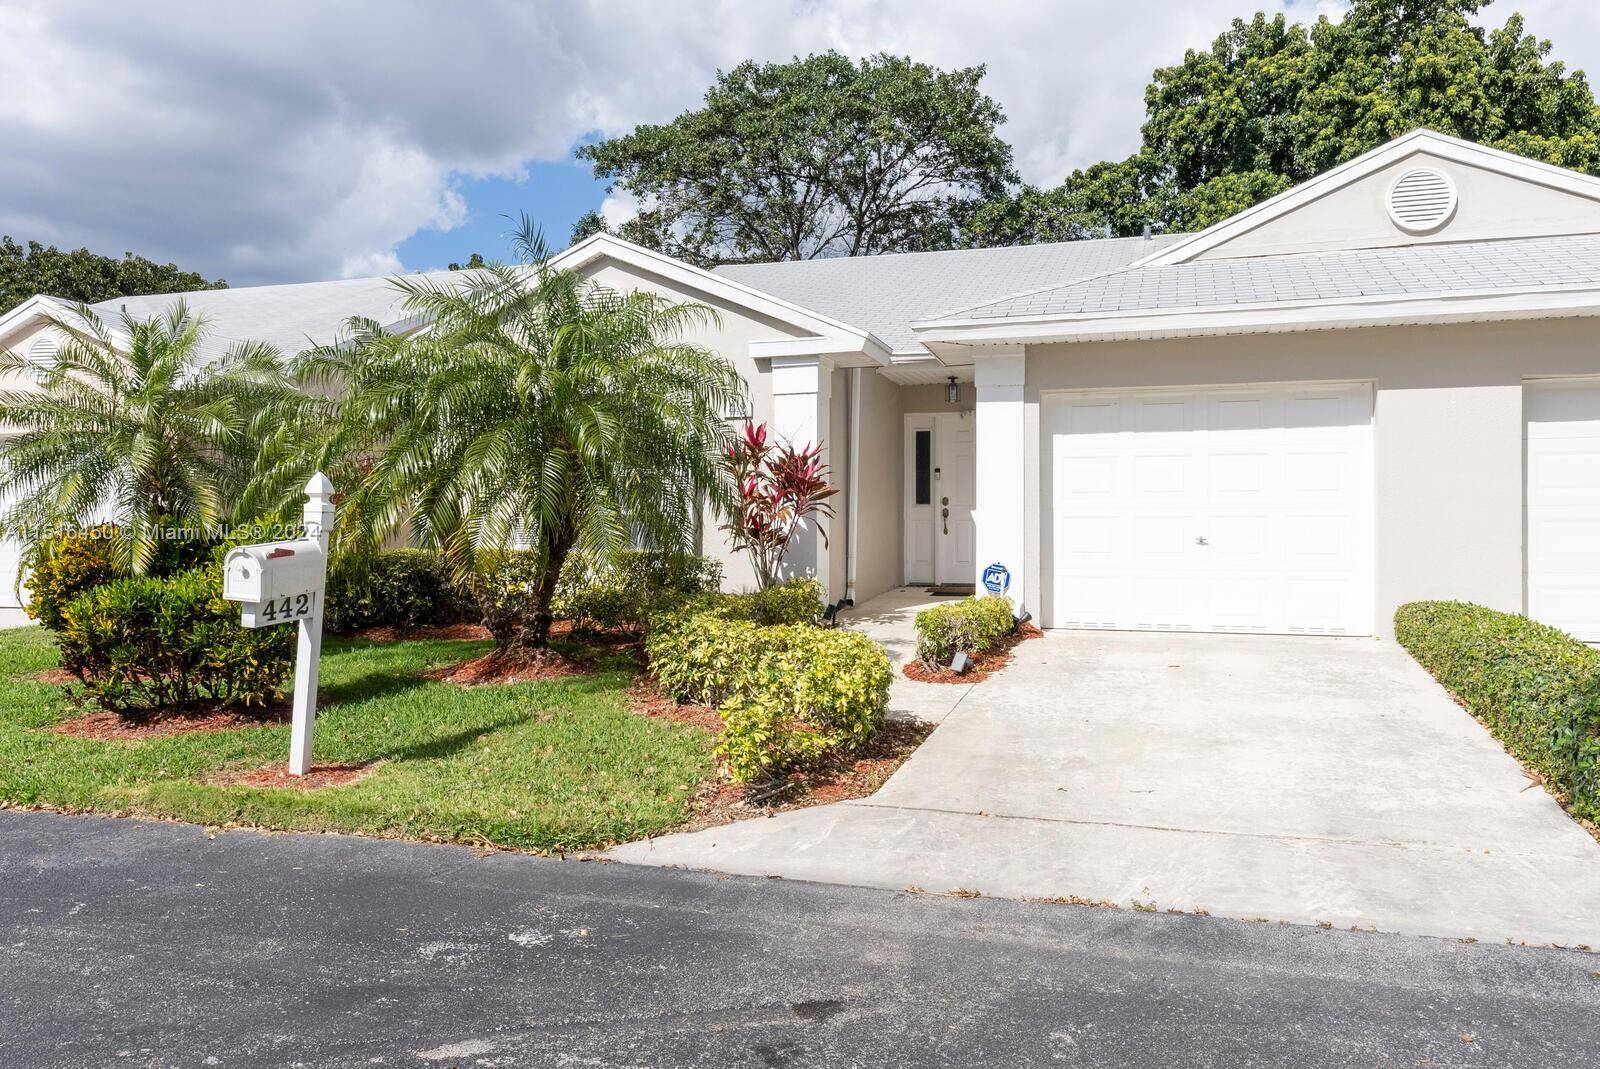 Welcome to 442 SE 22 DR, nestled in Homestead's desirable North Gate community where carefree living meets unparalleled convenience.